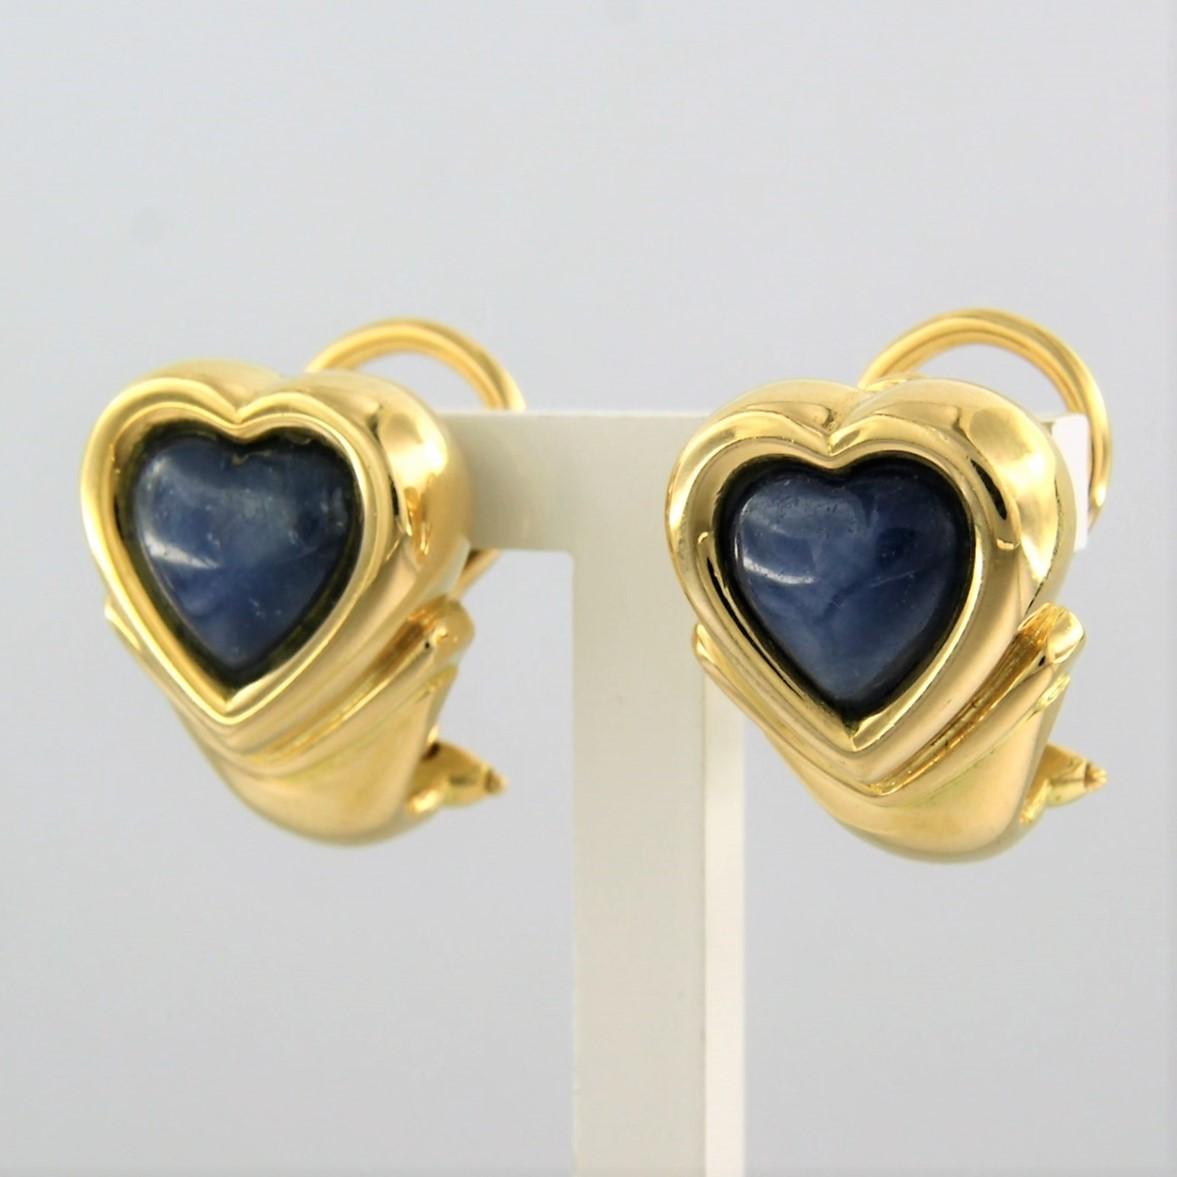 18 kt yellow gold ear clips set with labradorite - dim. 1.8 cm x 1.4 cm

detailed description:

size of the ear clips is 1.8 cm by 1.4 cm wide

Total weight 18.1 grams

put with

- 2 x 9.4 mm x 8.5 mm heart shape cabachon cut labradorite

color